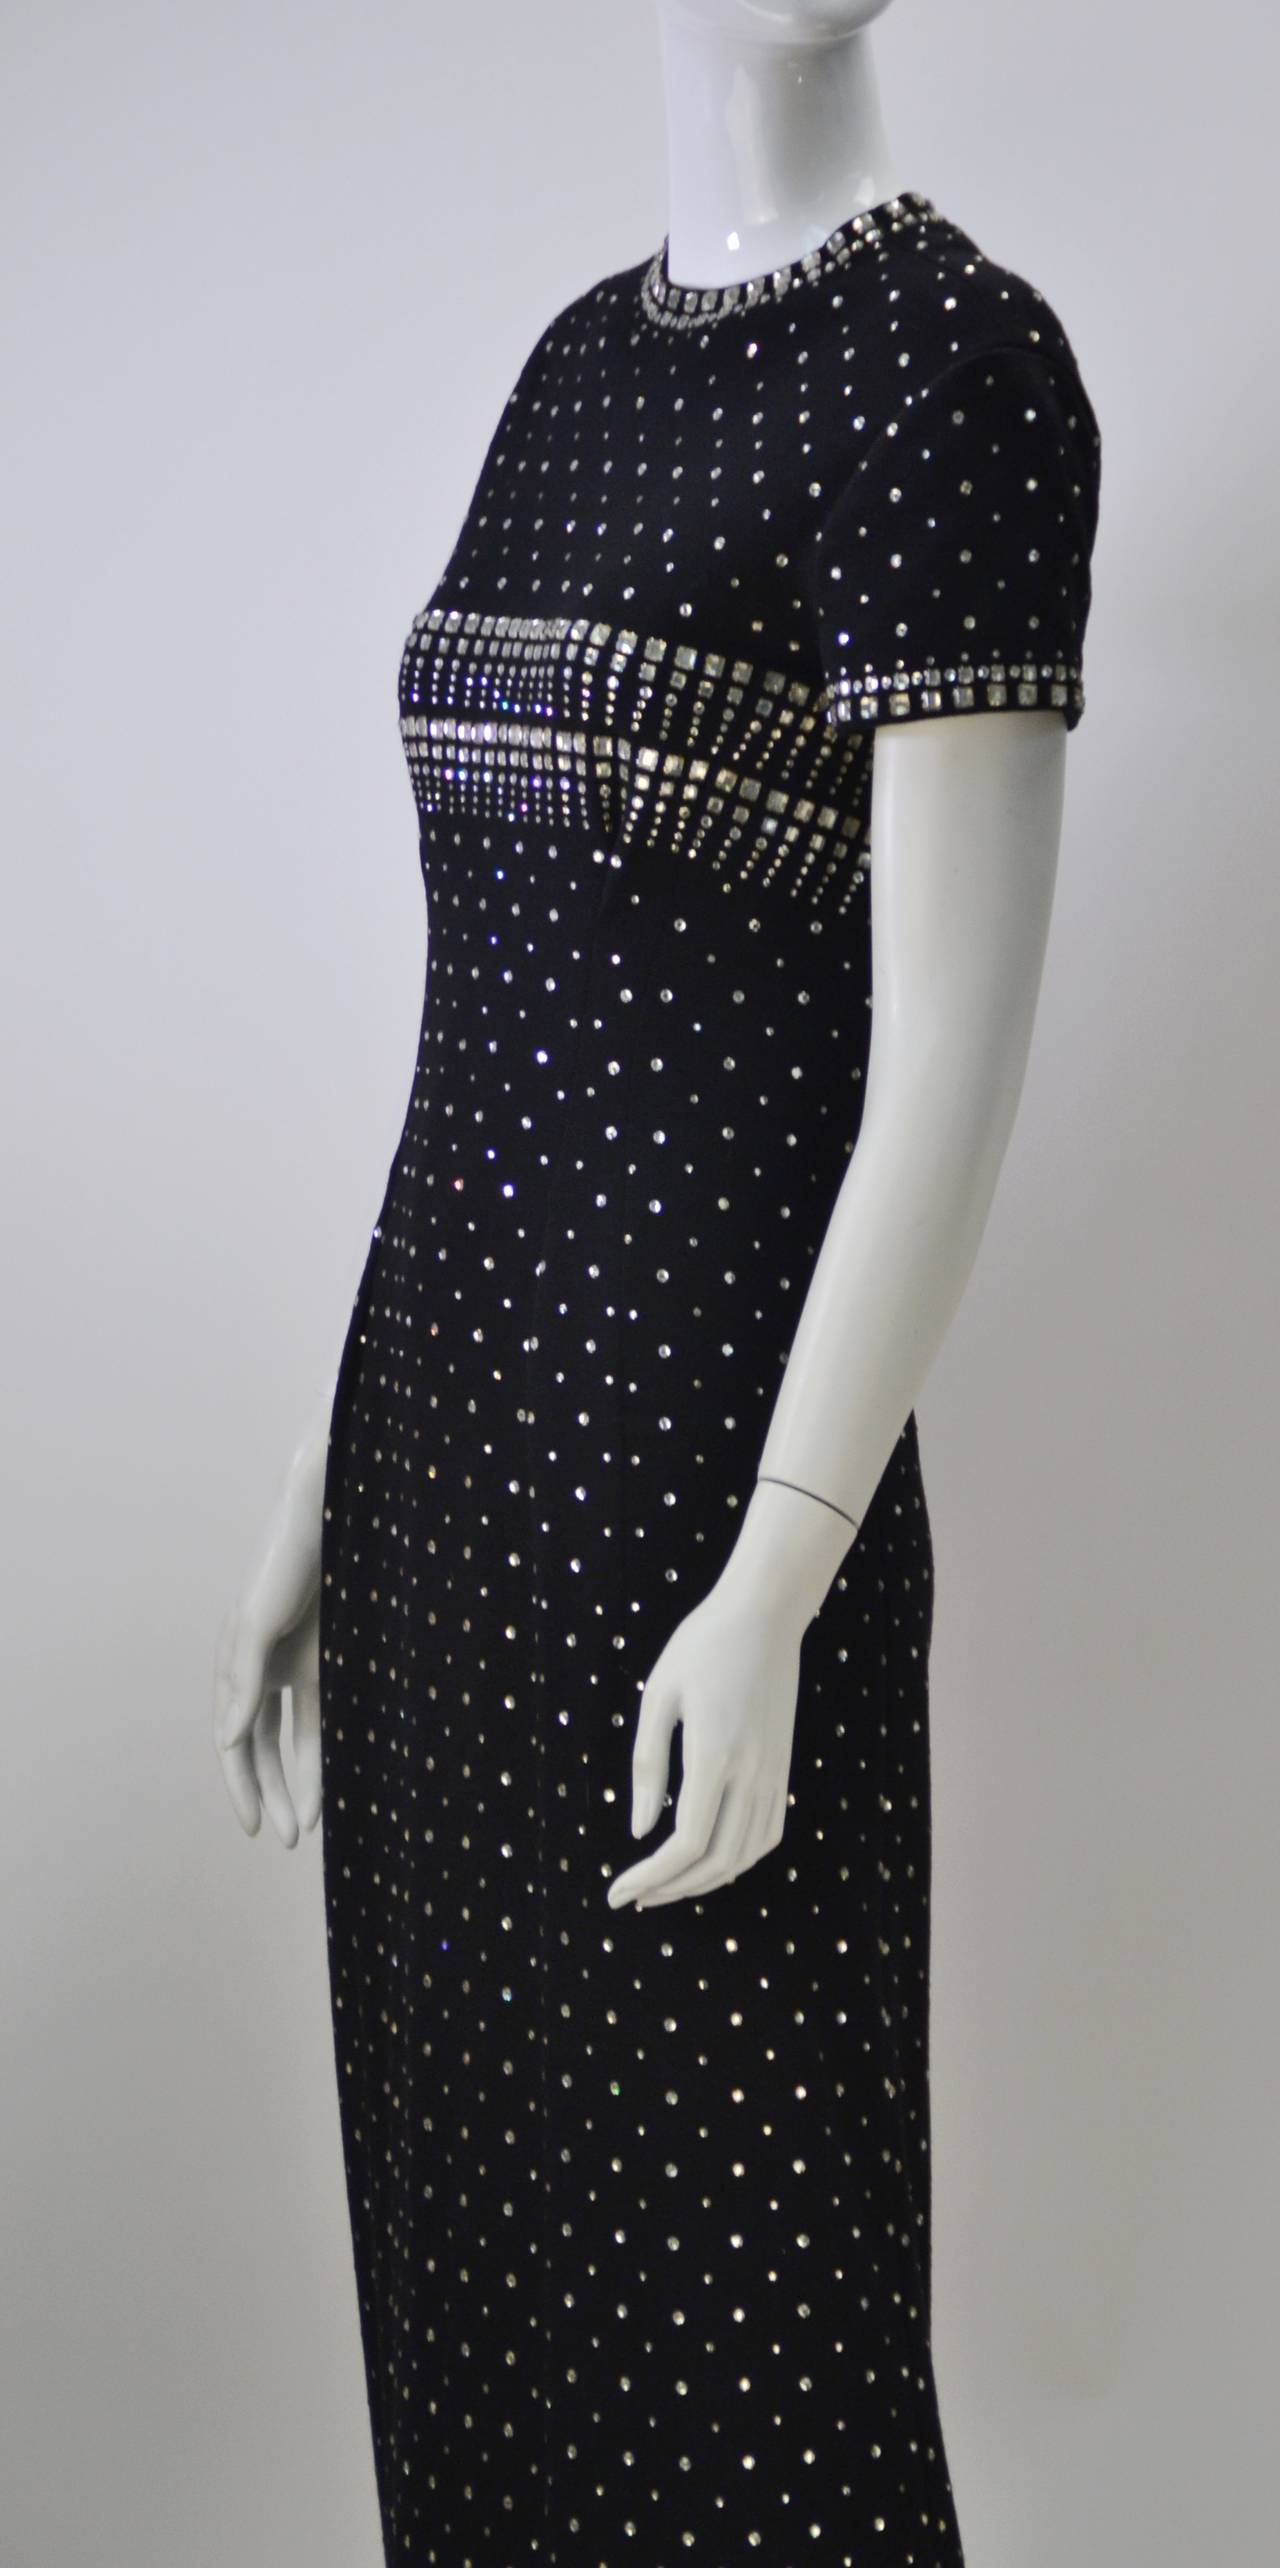 Women's Vintage Black Maxi Dress with Patterned Rhinestone Detail